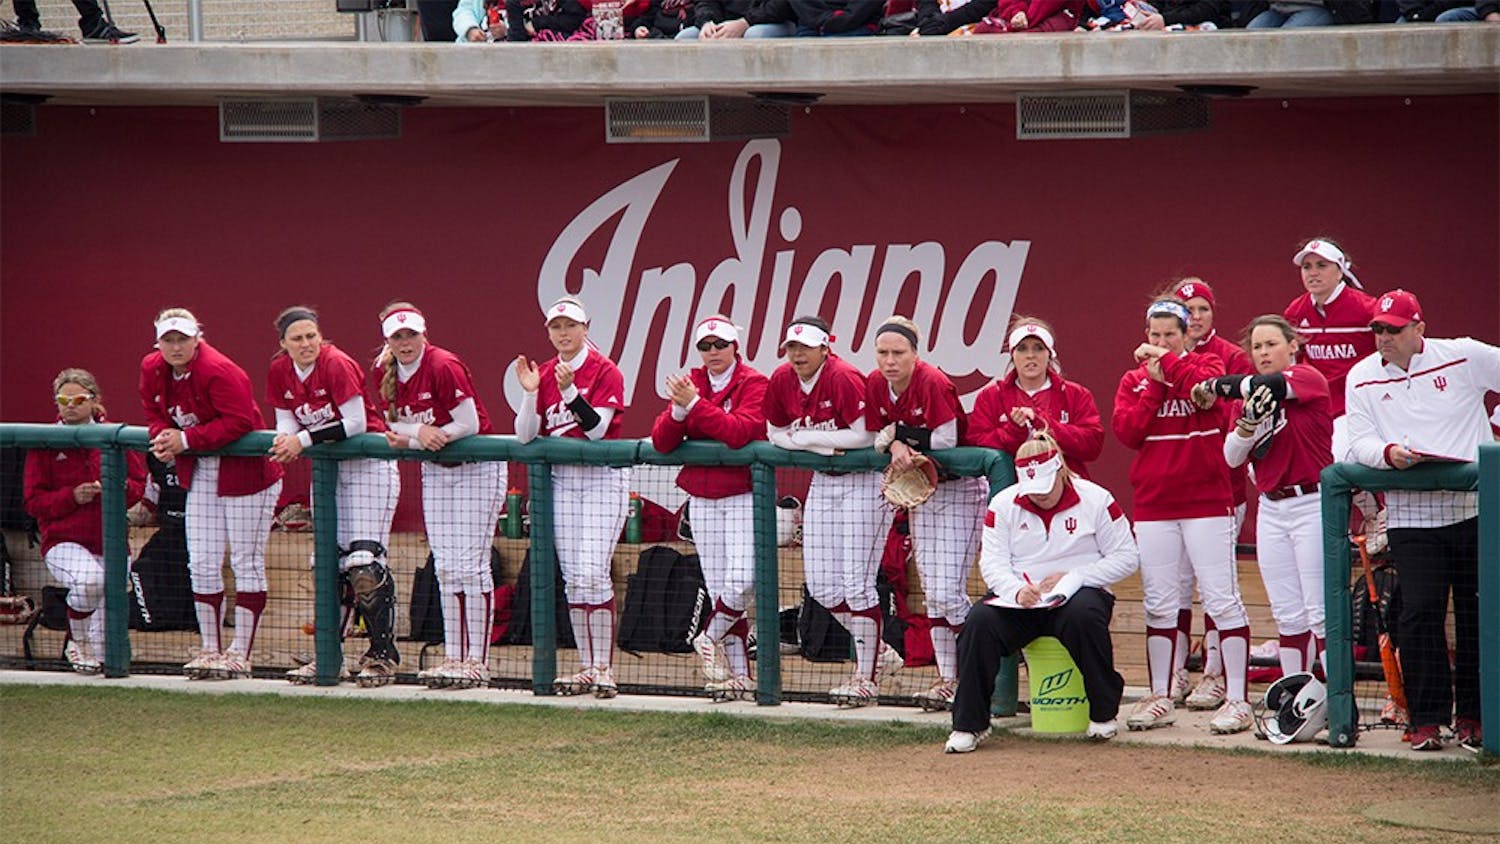 Members of IU Softball team watch the game against #2 ranked University of Michigan at Andy Mohr Field last Saturday. The Hoosiers lost 0-8.